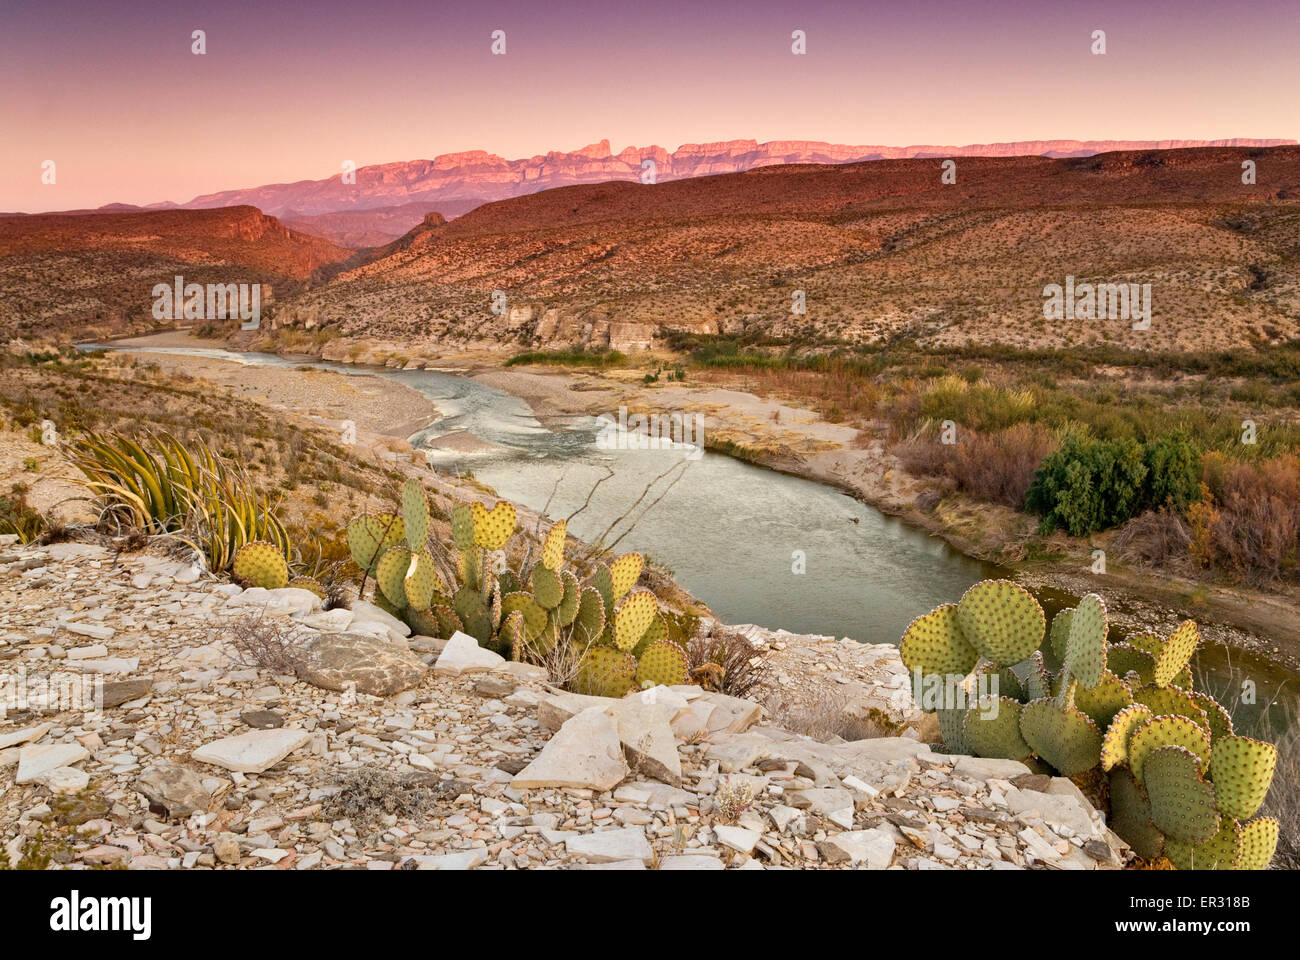 Rio Grande in Hot Springs area, Sierra del Carmen in Mexico in dist, sunset, Chihuahuan Desert in Big Bend National Park, Texas Stock Photo